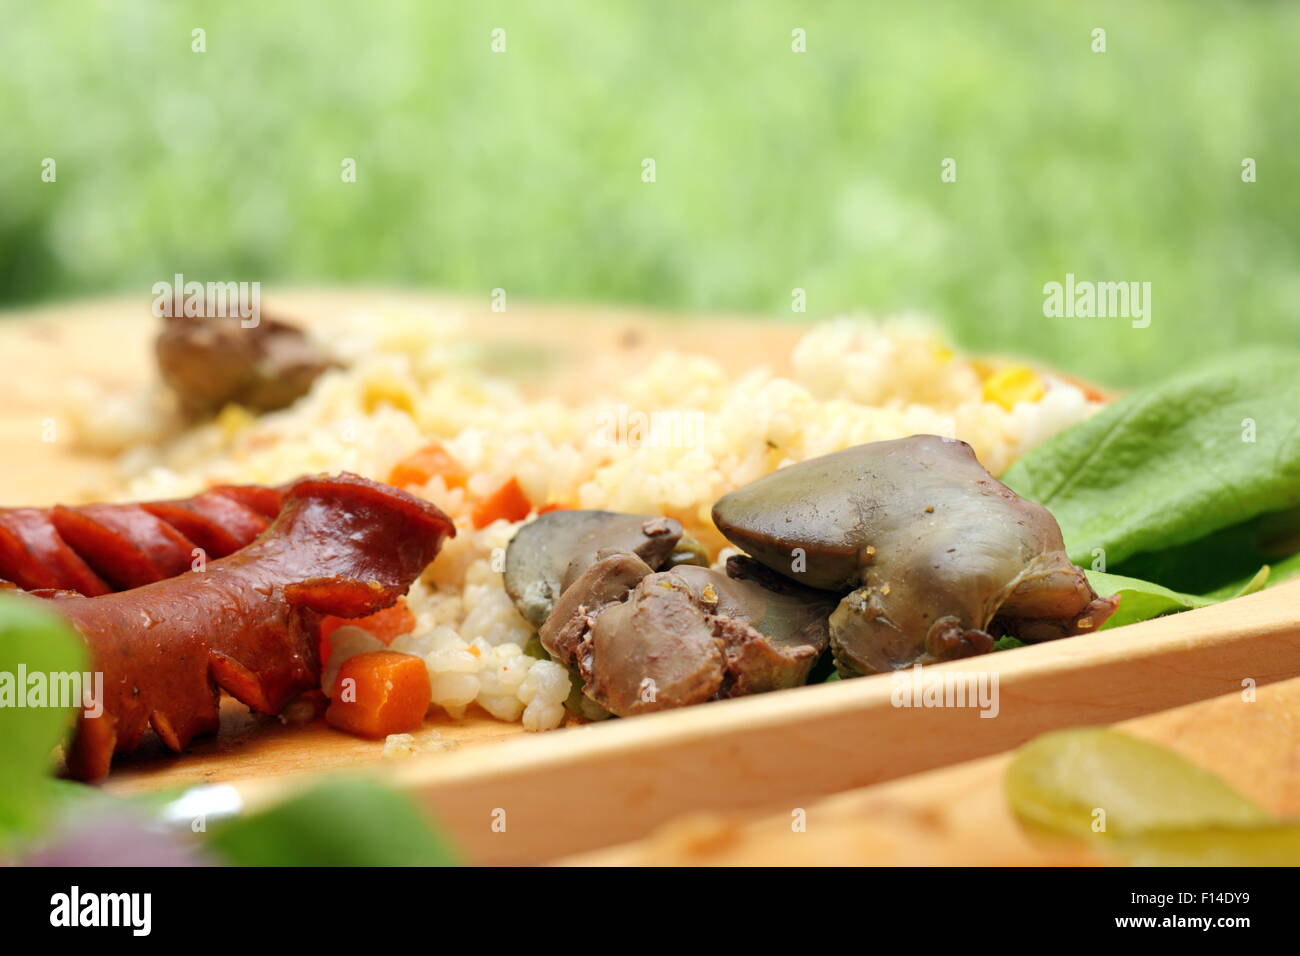 chicken liver and pork sausages served with green salad on wooden plate Stock Photo